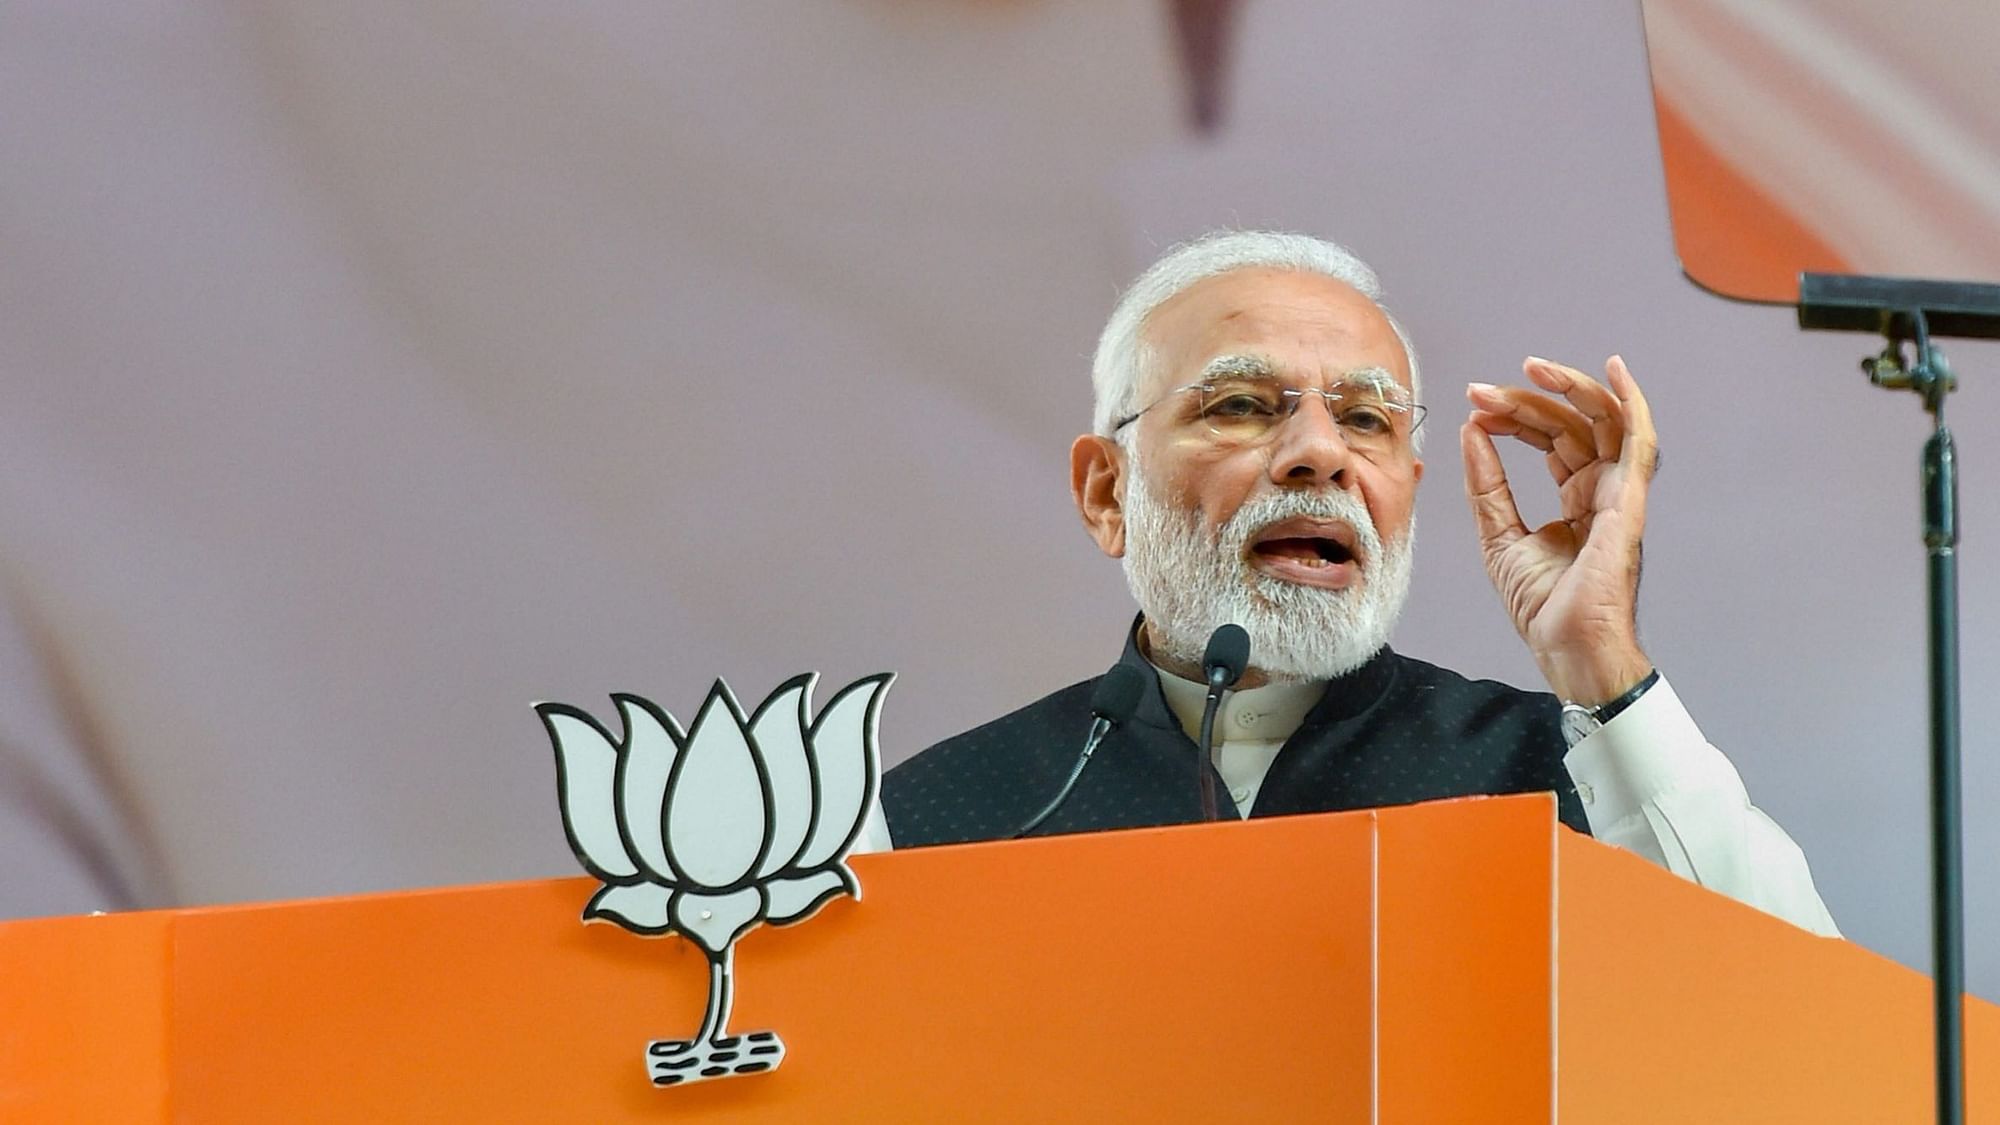 PM Modi said that the BJP government has has given a completely new speed to development.